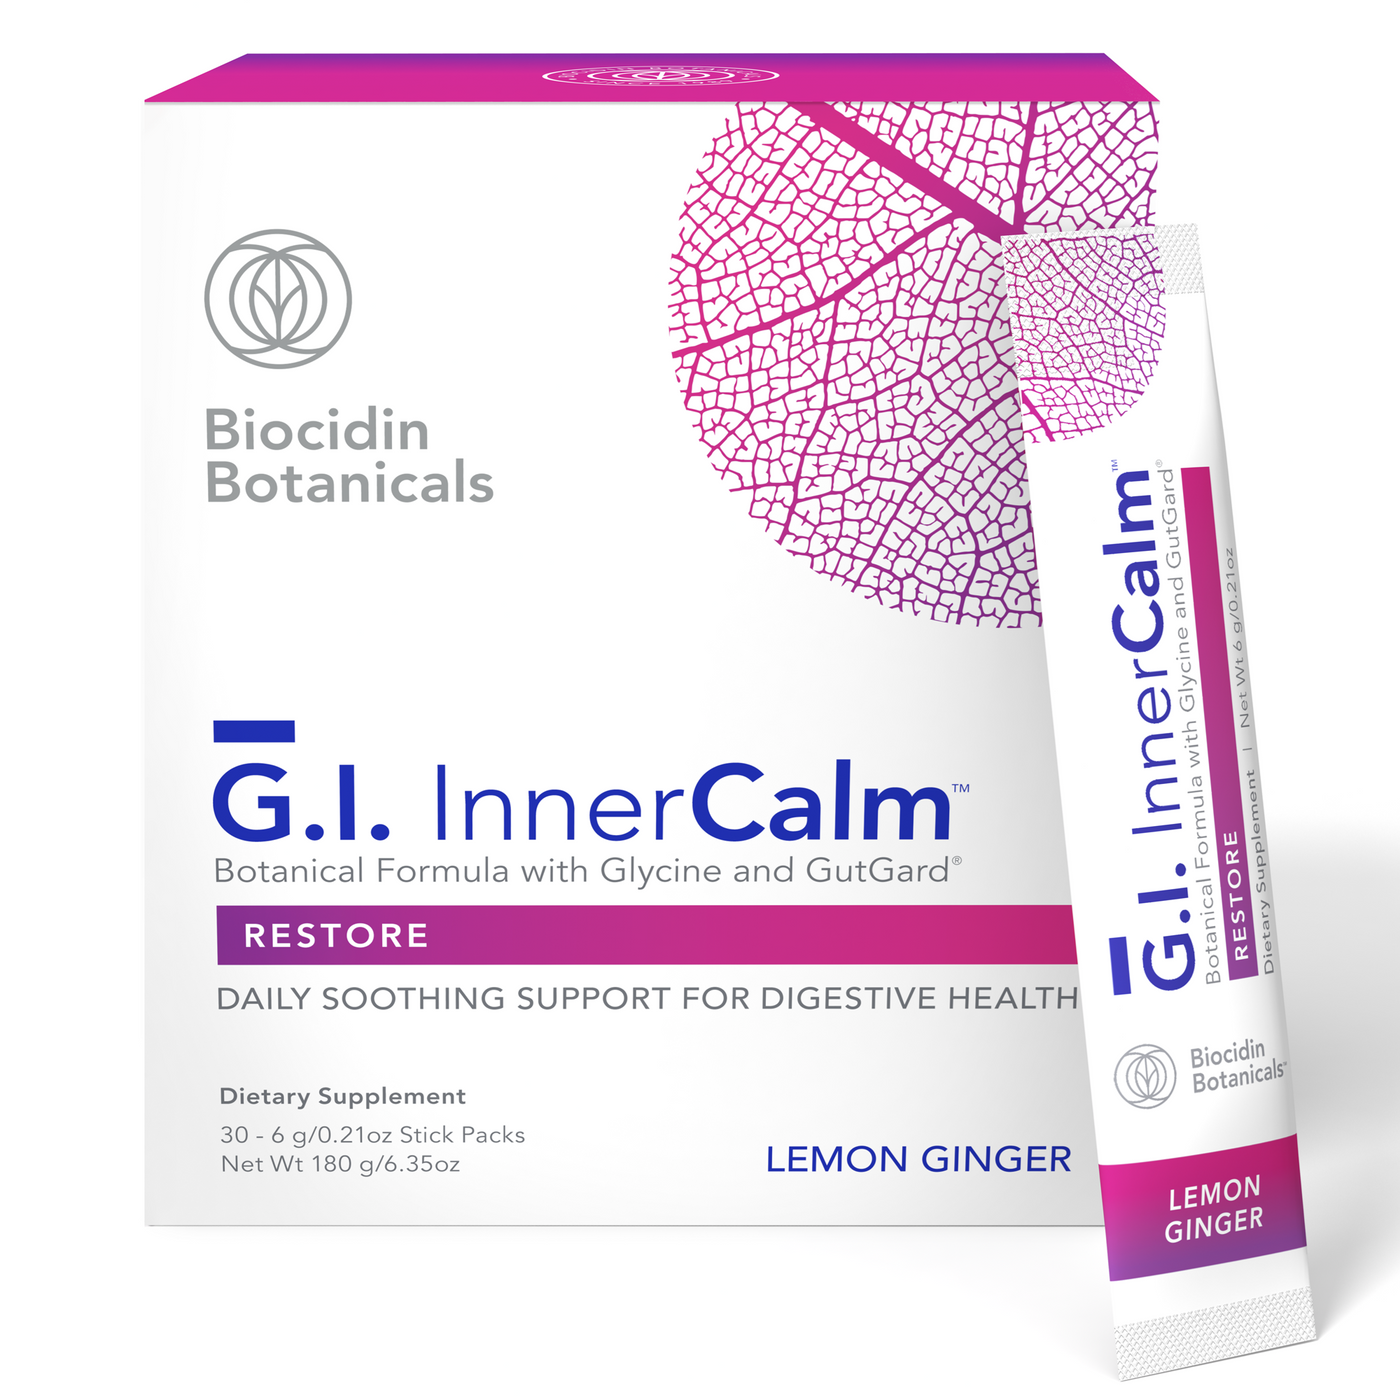 G.I. InnerCalm 30 stick packs Curated Wellness